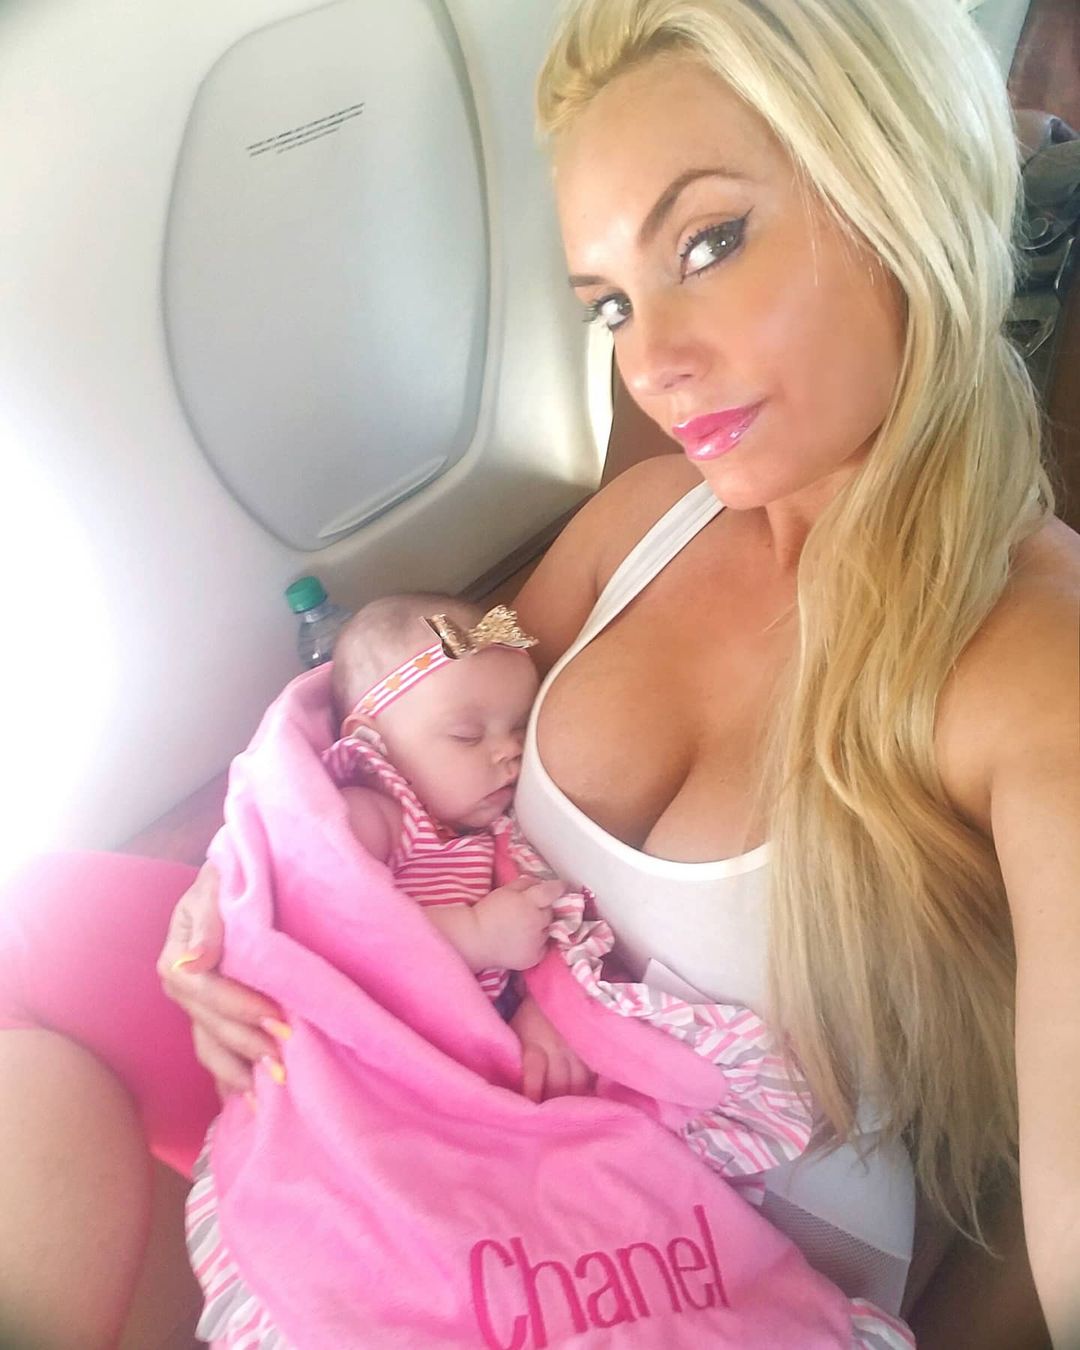 https://www.usmagazine.com/wp-content/uploads/2021/08/Coco-Austins-Breast-Feeding-Photos-With-Daughter-Chanel-Nursing-Quotes-November-2015.jpg?quality=86&strip=all